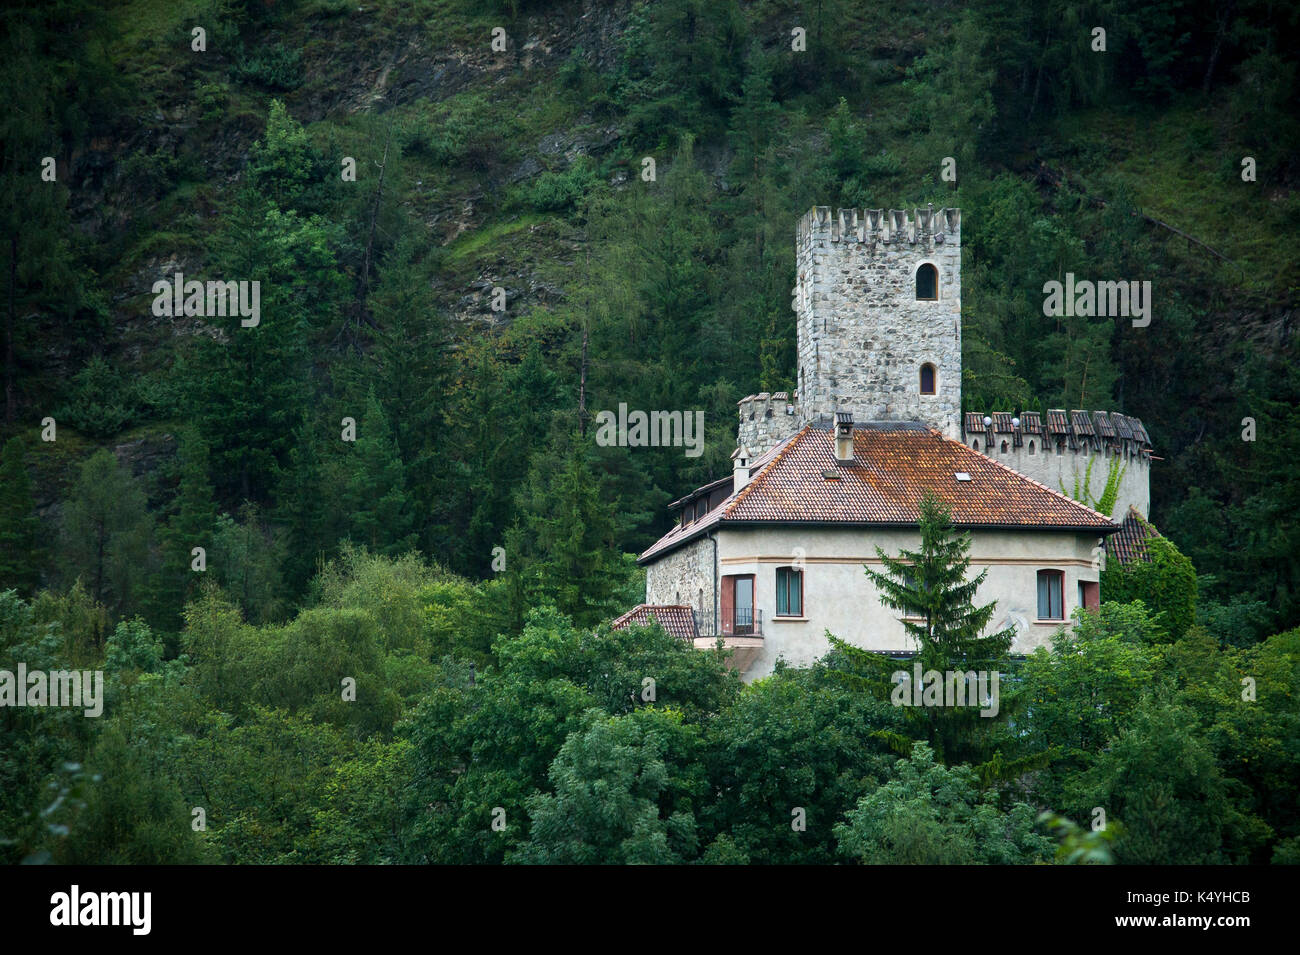 Medieval Castel Guelfo Burg Welfenstein seen from Autostrada del Brennero A22 in Campo di Trens/Freienfeld, Trentino-Alto Adige, Italy. 1 September 20 Stock Photo